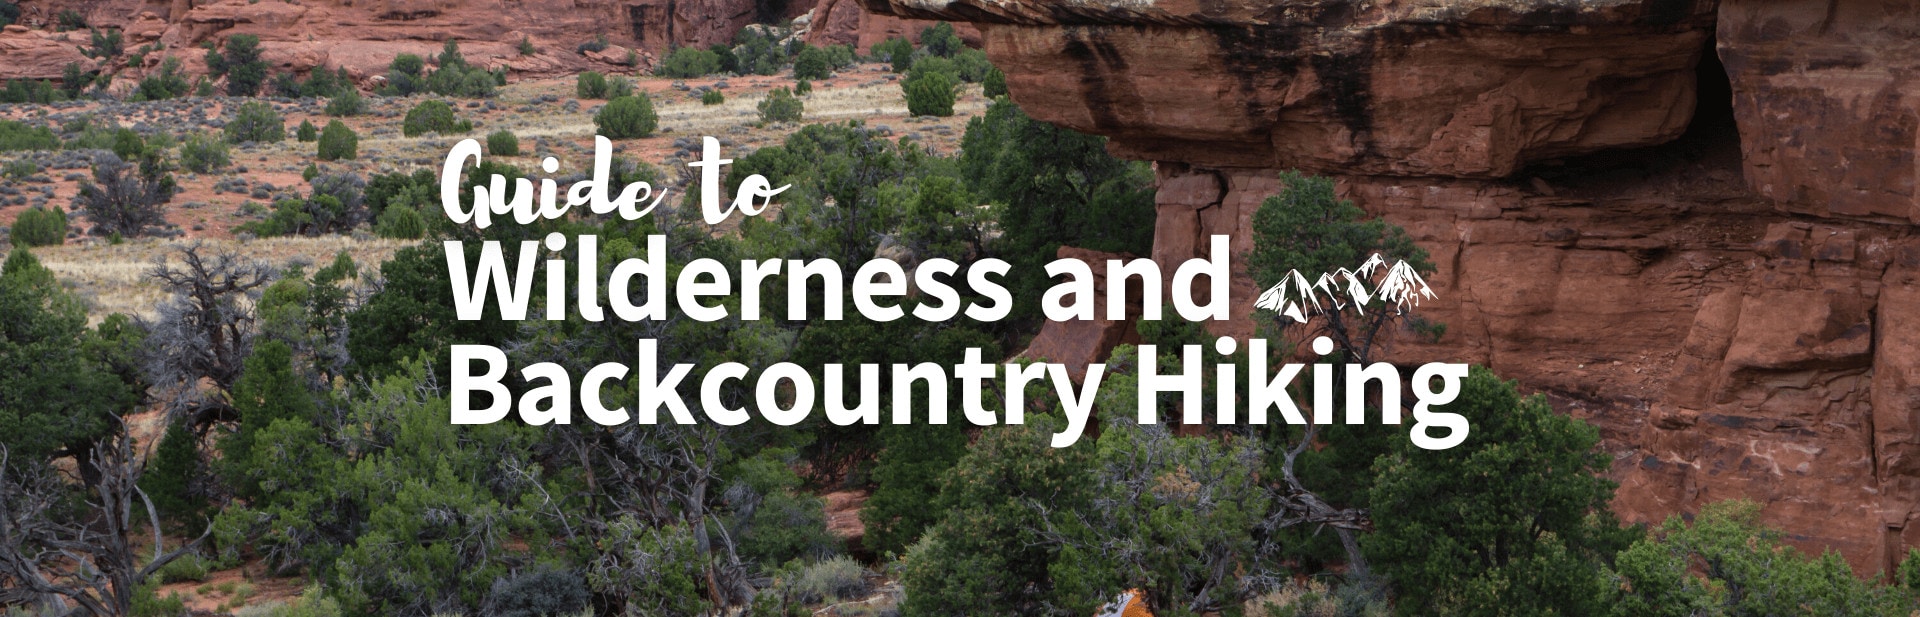 Wilderness and Backcountry Hiking: A Complete Guide